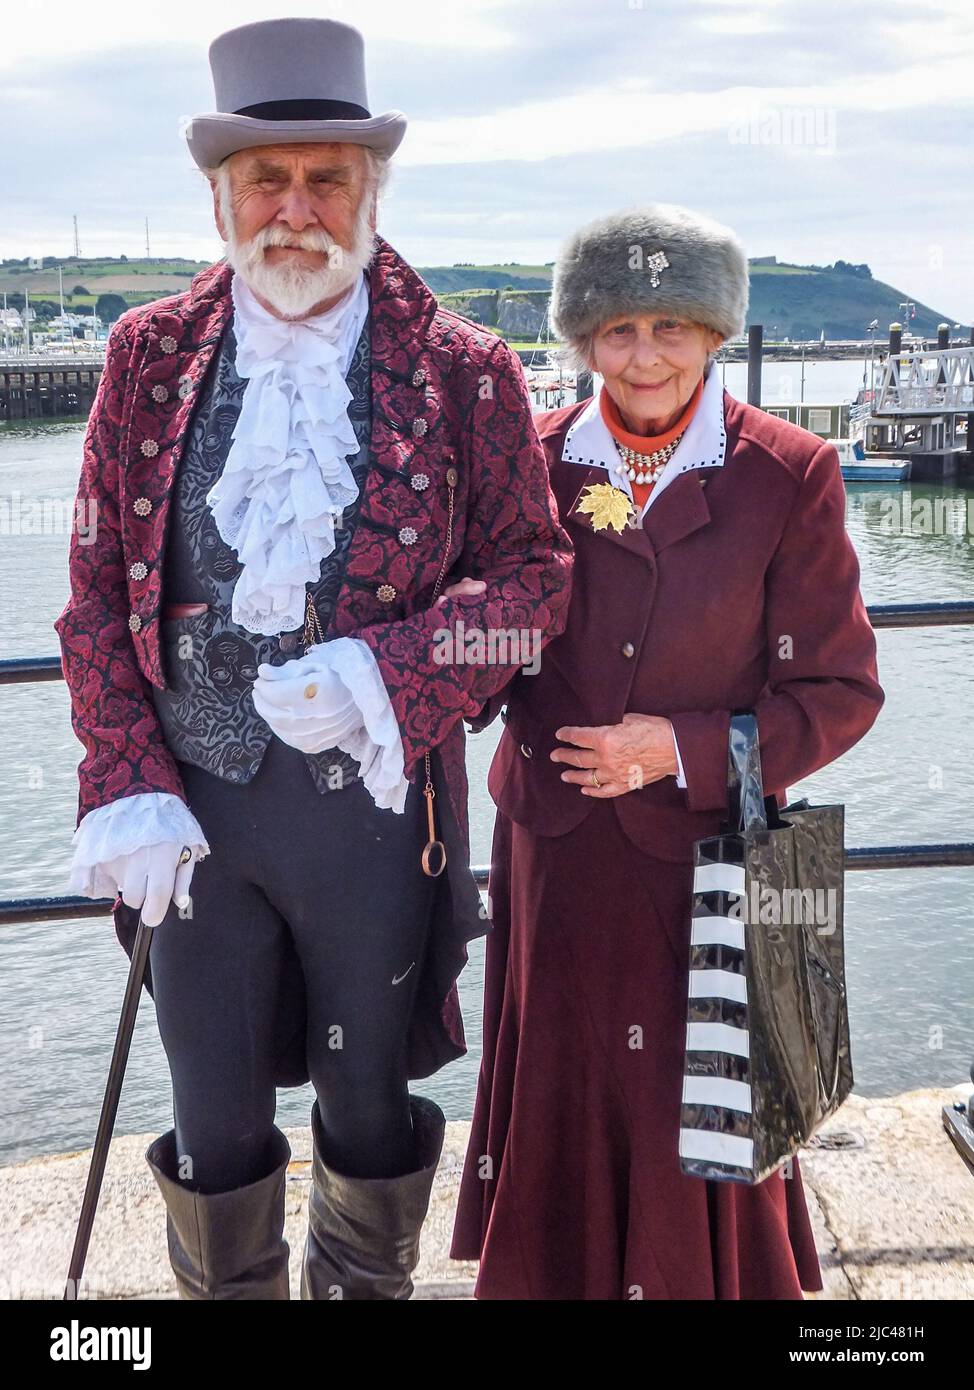 Reenactors portray a 1620 man and woman at the Mayflower Steps in Plymouth, Devon, England, UK. Stock Photo